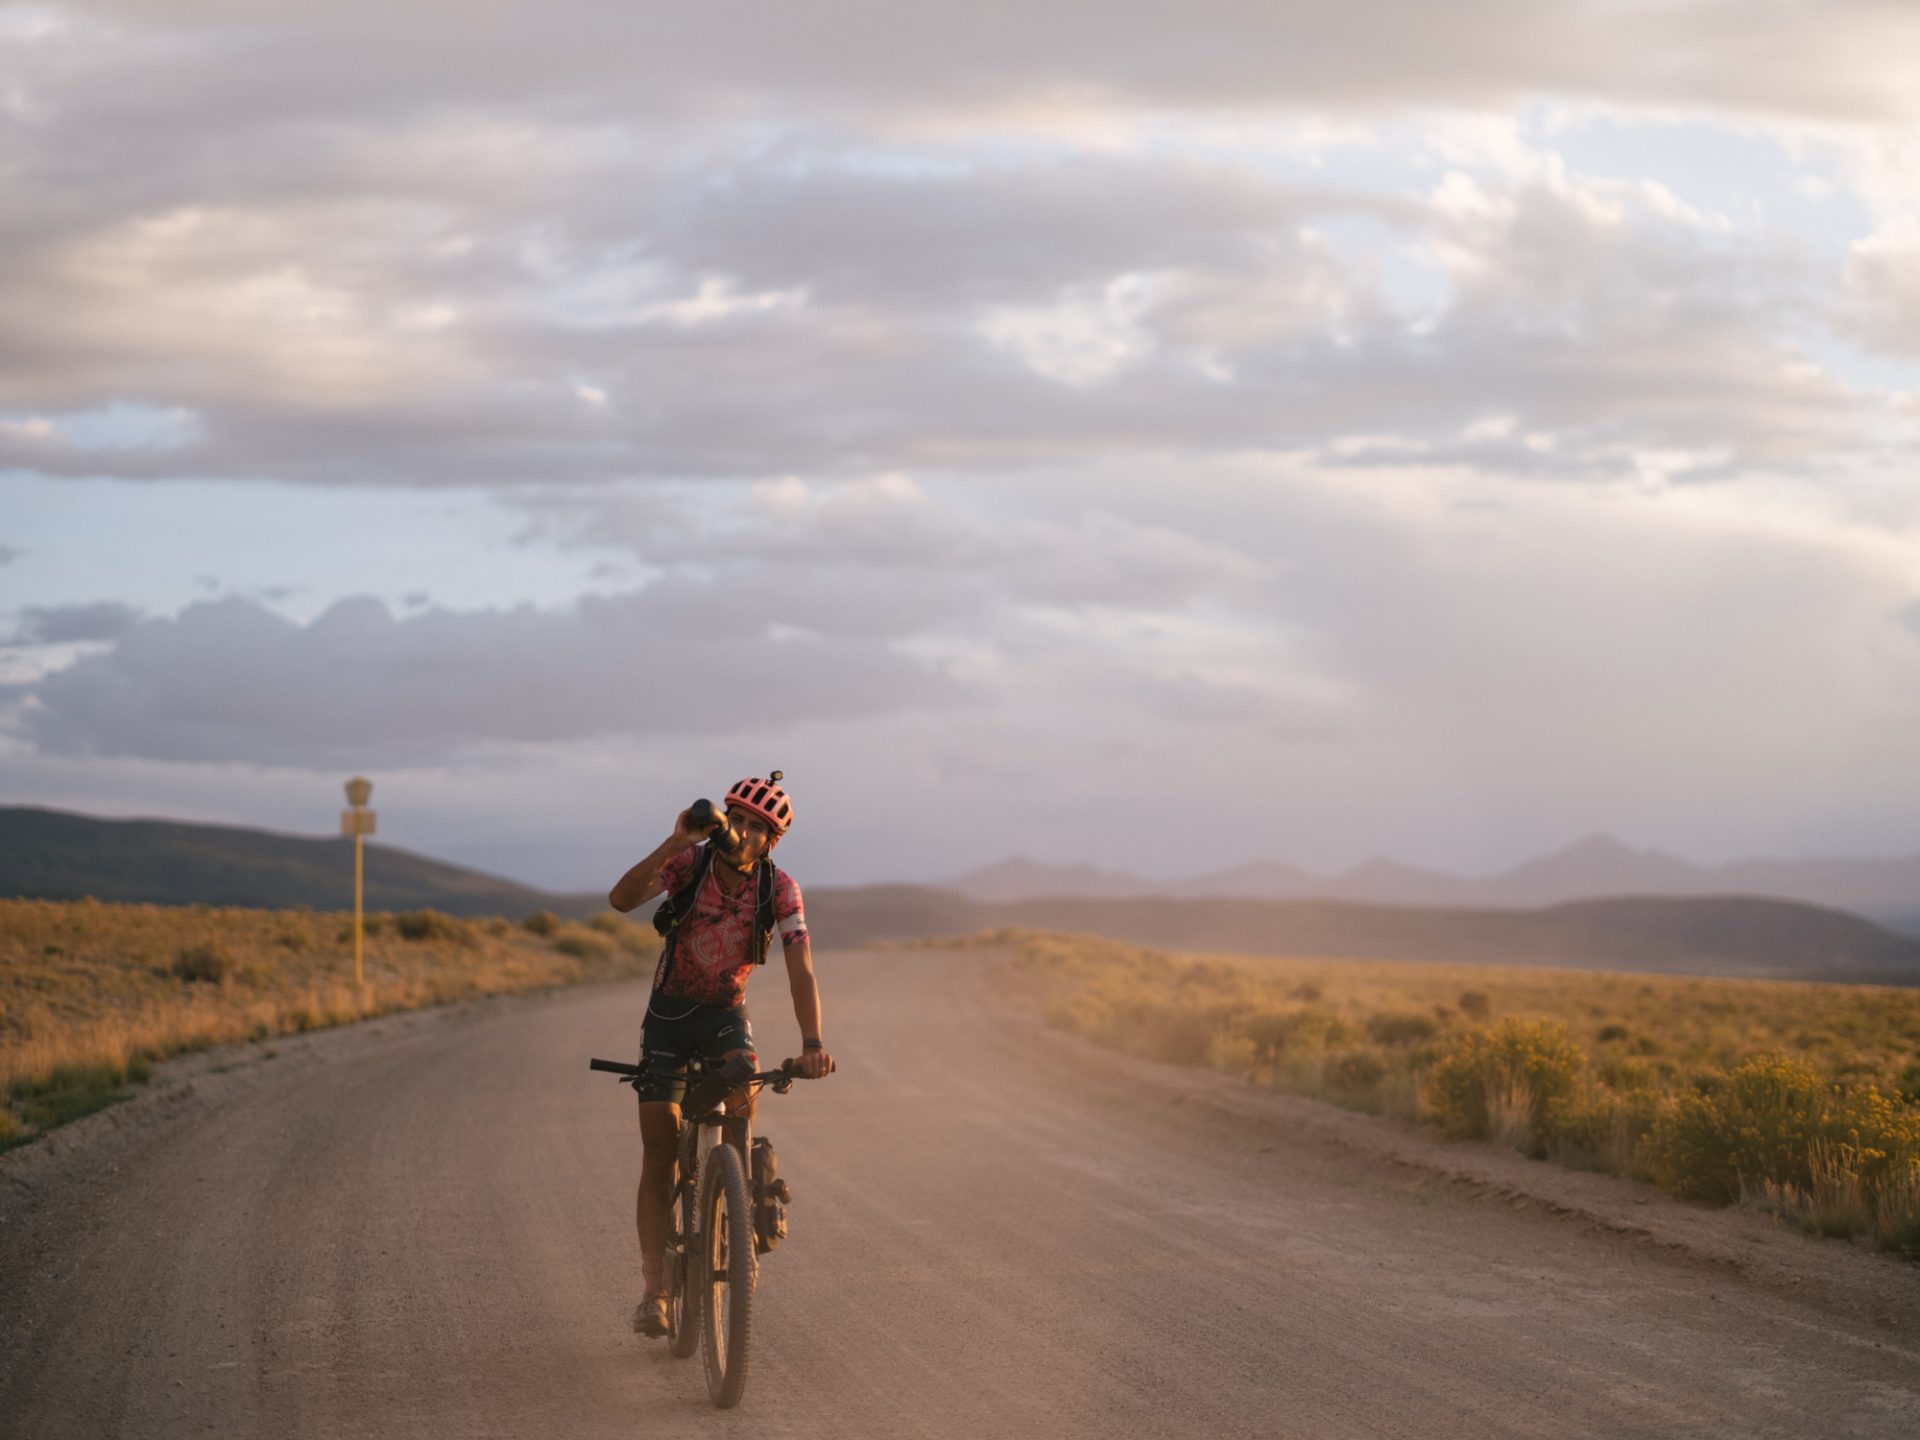 Lachlan Morton drinks from a water bottle while riding his mountain bike on a dirt road at dusk.